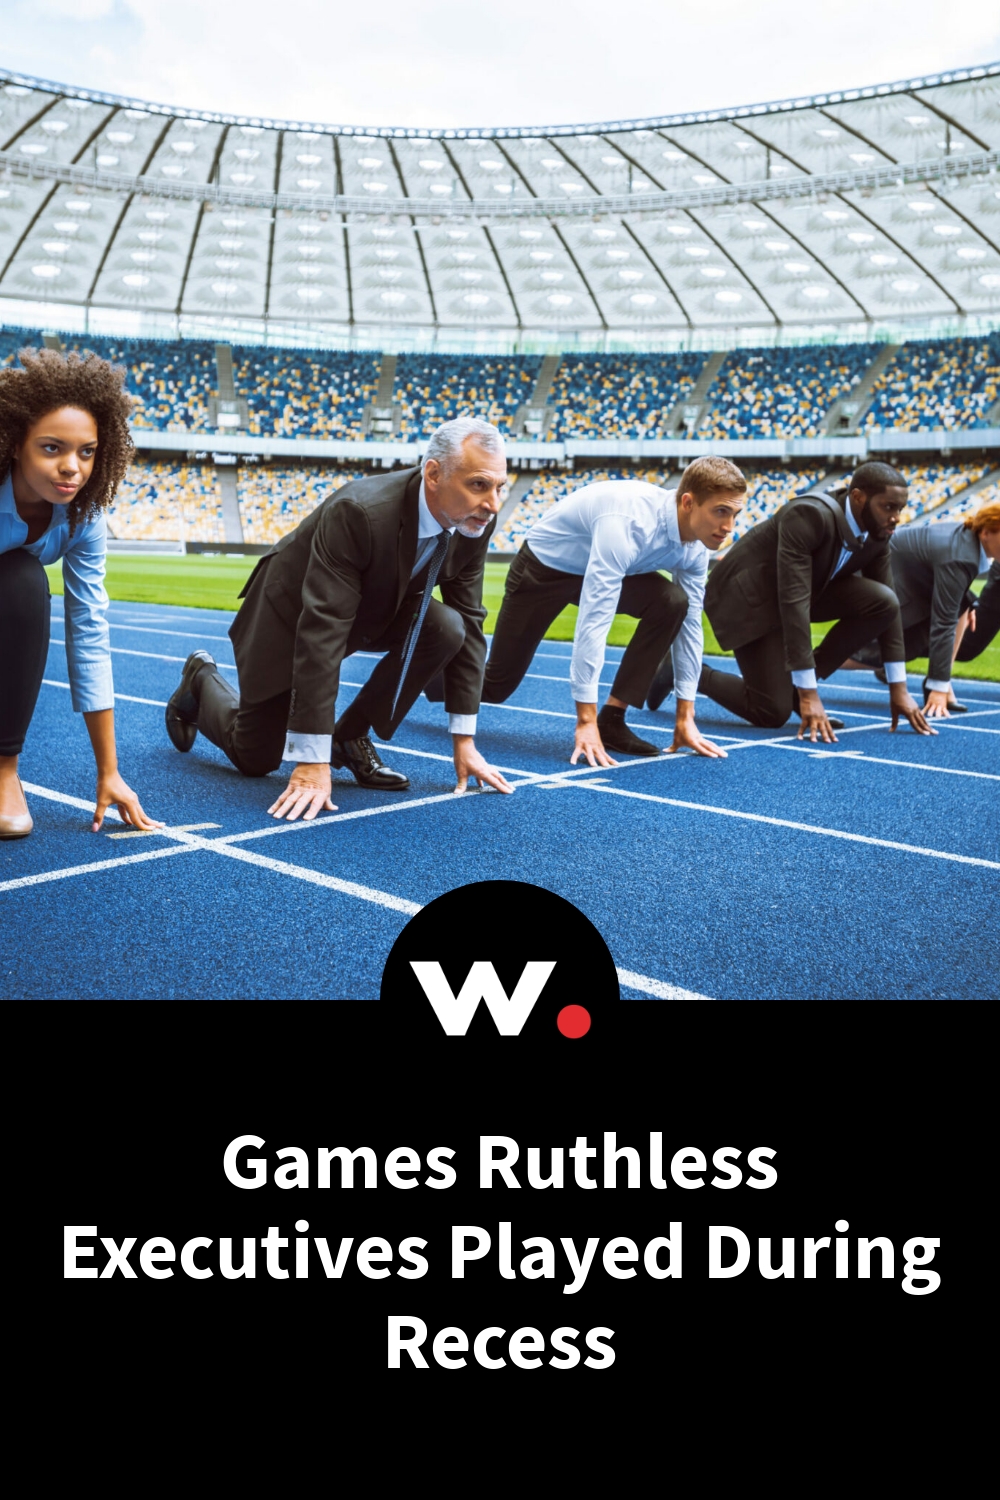 Games Ruthless Executives Played During Recess